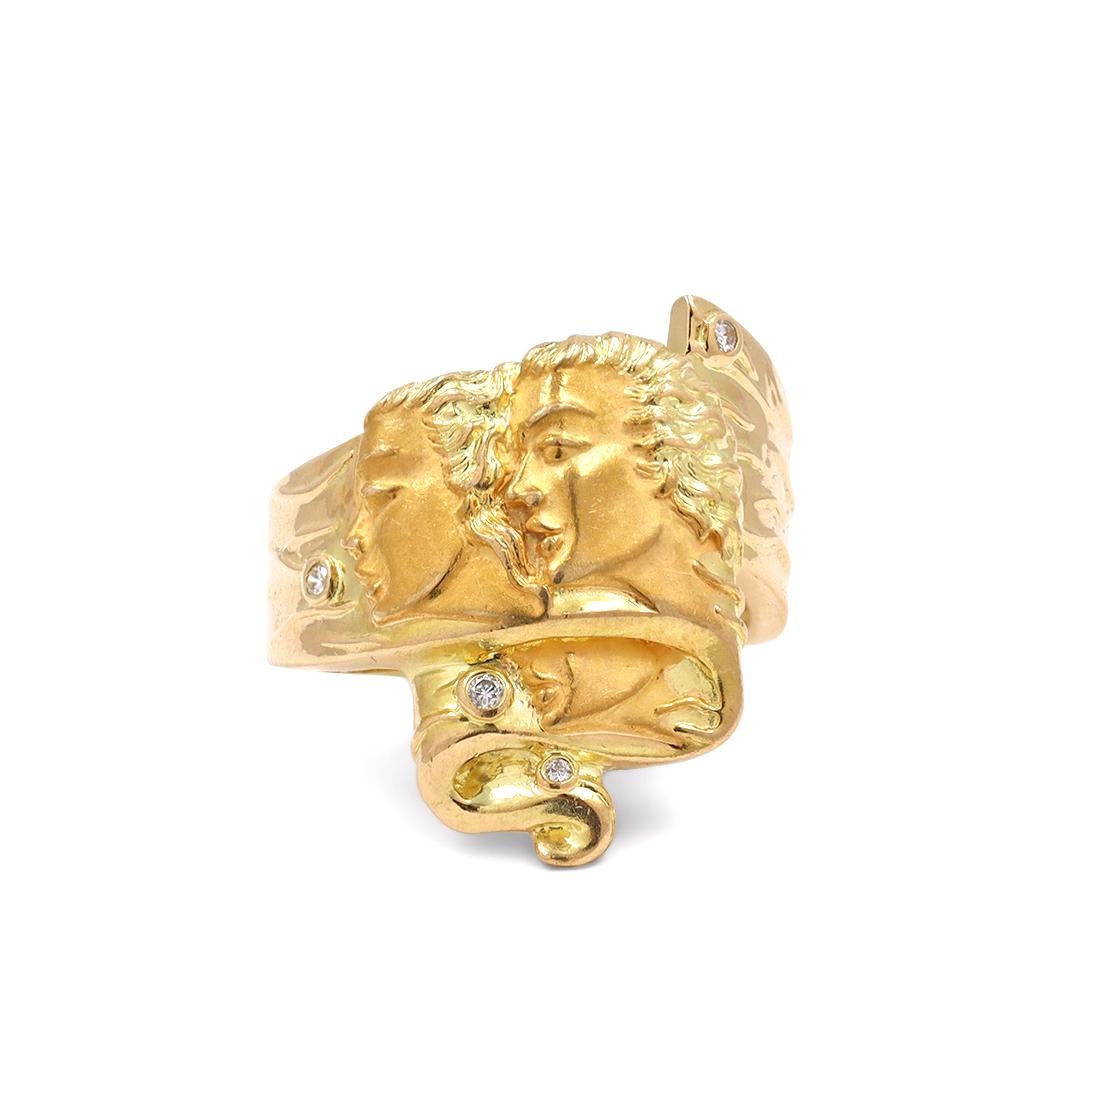 Authentic Carrera Y Carrera Adam and Eve ring crafted in 18 karat yellow gold accented by 4 round cut diamonds. The motif is inspired by Adam and Eve. The ring measures 21mm in length and the band is 3.3mm wide. Ring size 7 US, 55 EU. The ring is